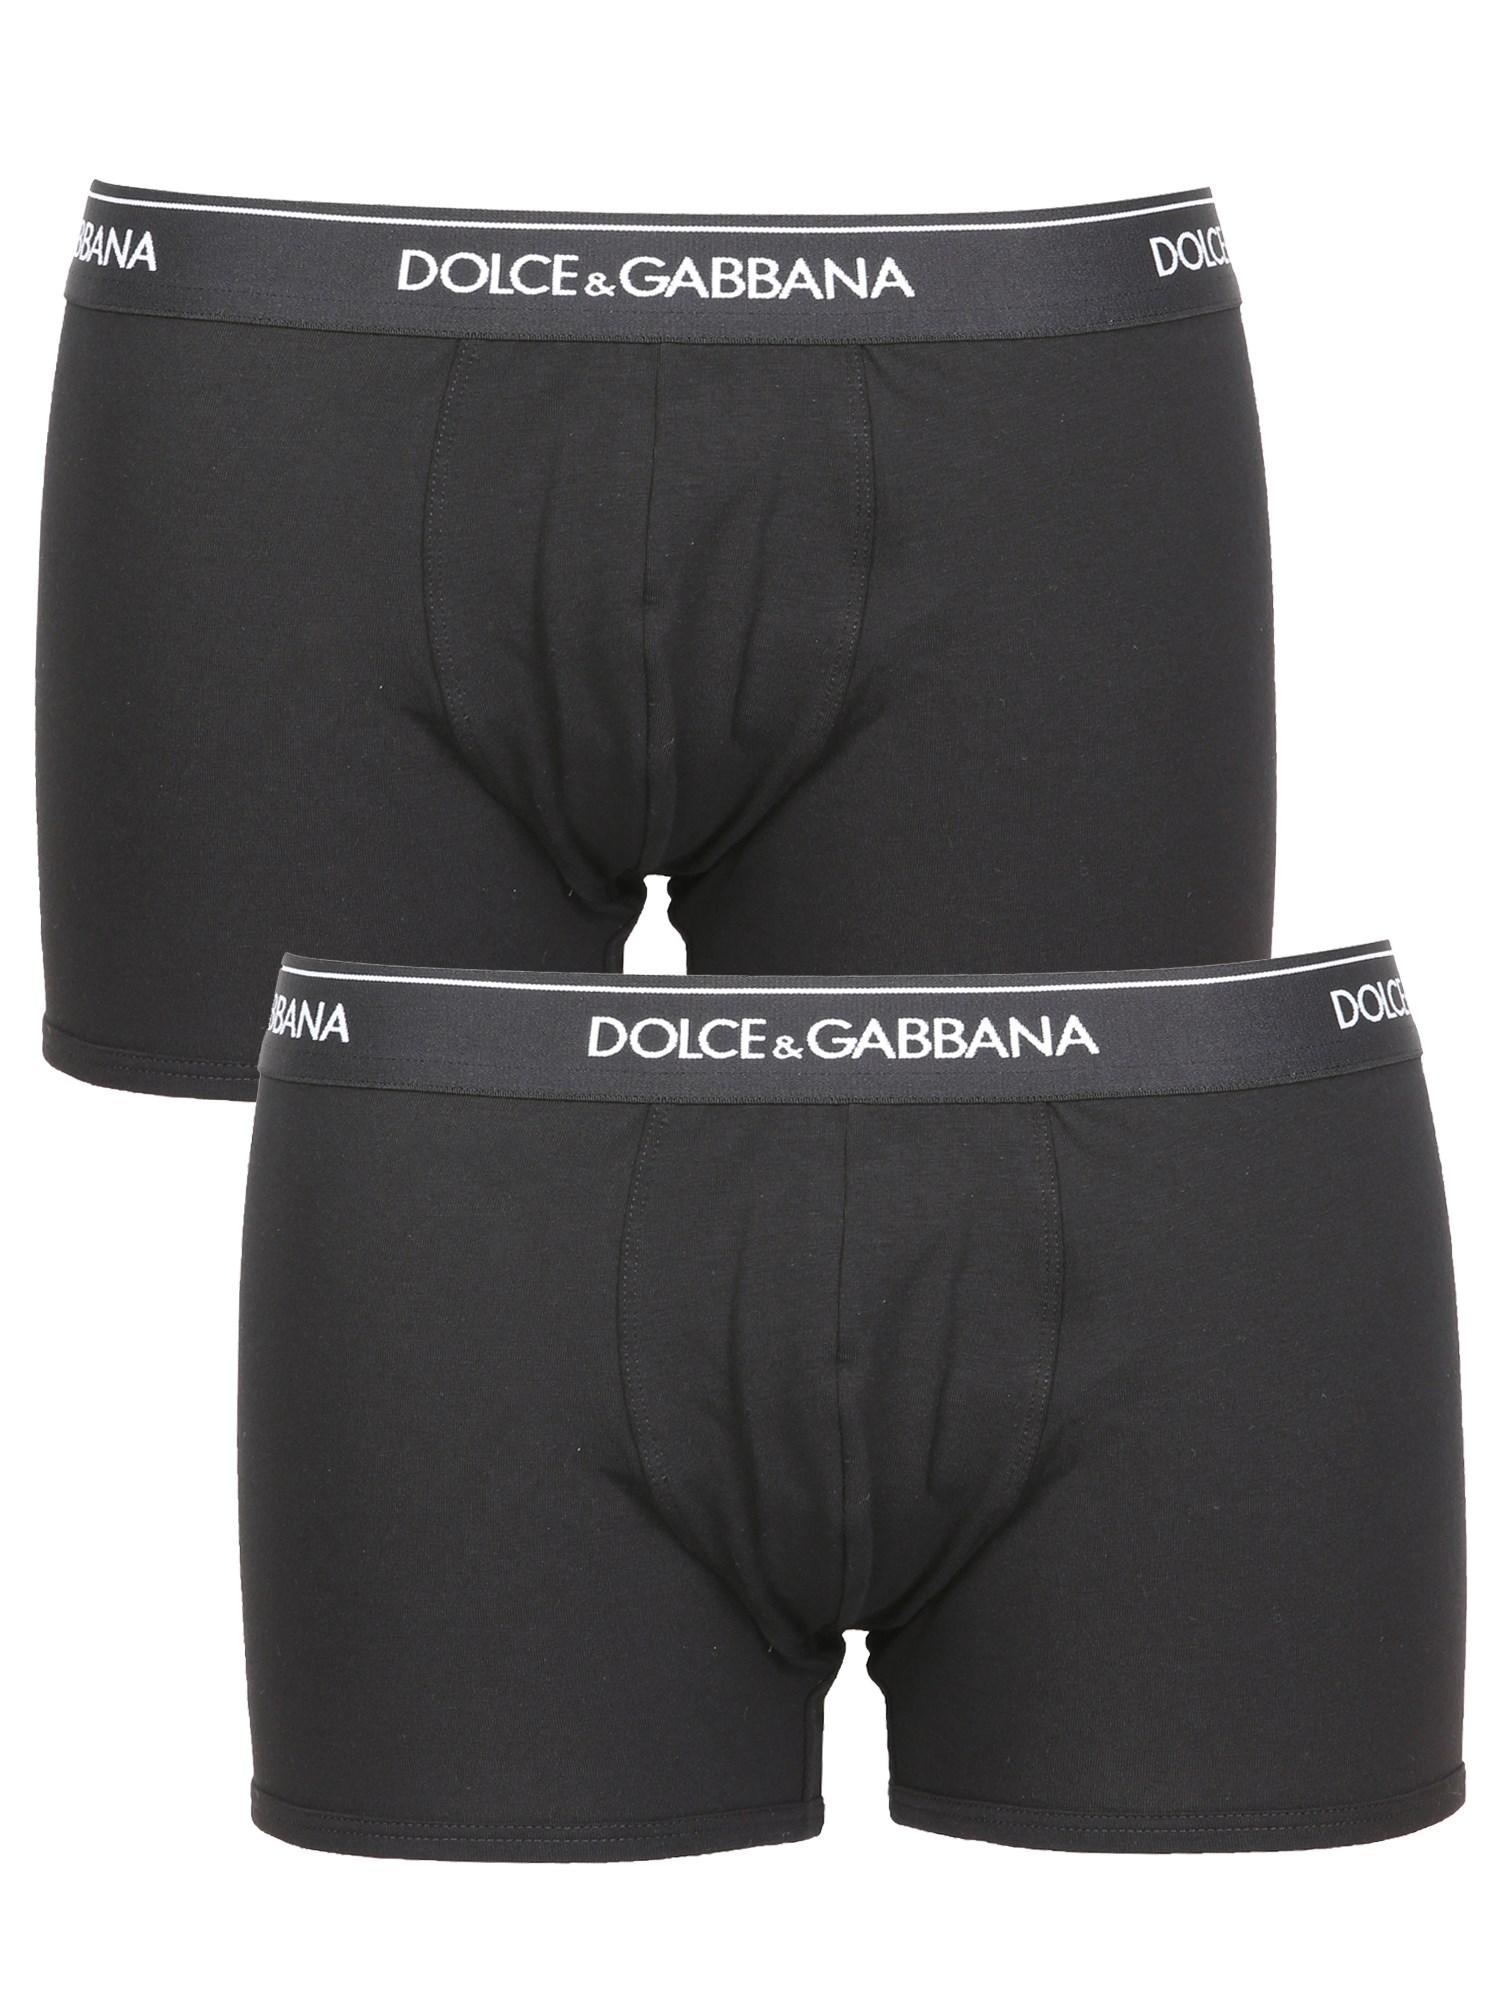 Dolce & Gabbana Cotton Pack Of Two Boxers in Nero (Black) for Men - Lyst